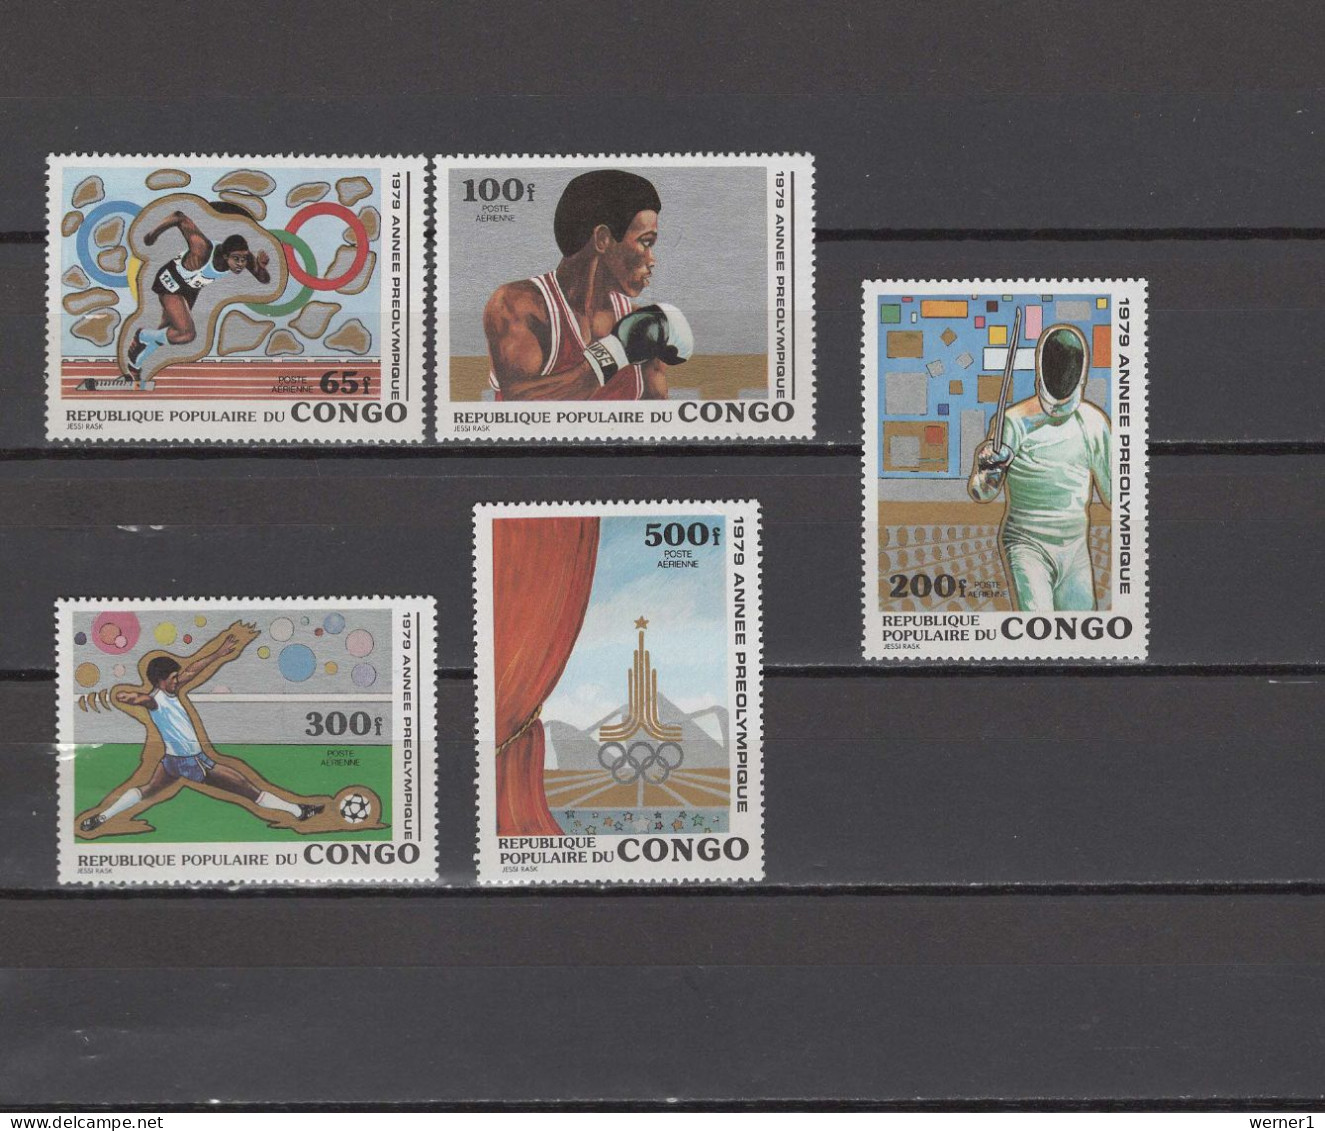 Congo 1979 Olympic Games Moscow, Boxing, Football Soccer, Fencing, Athletics Set Of 5 MNH - Verano 1980: Moscu